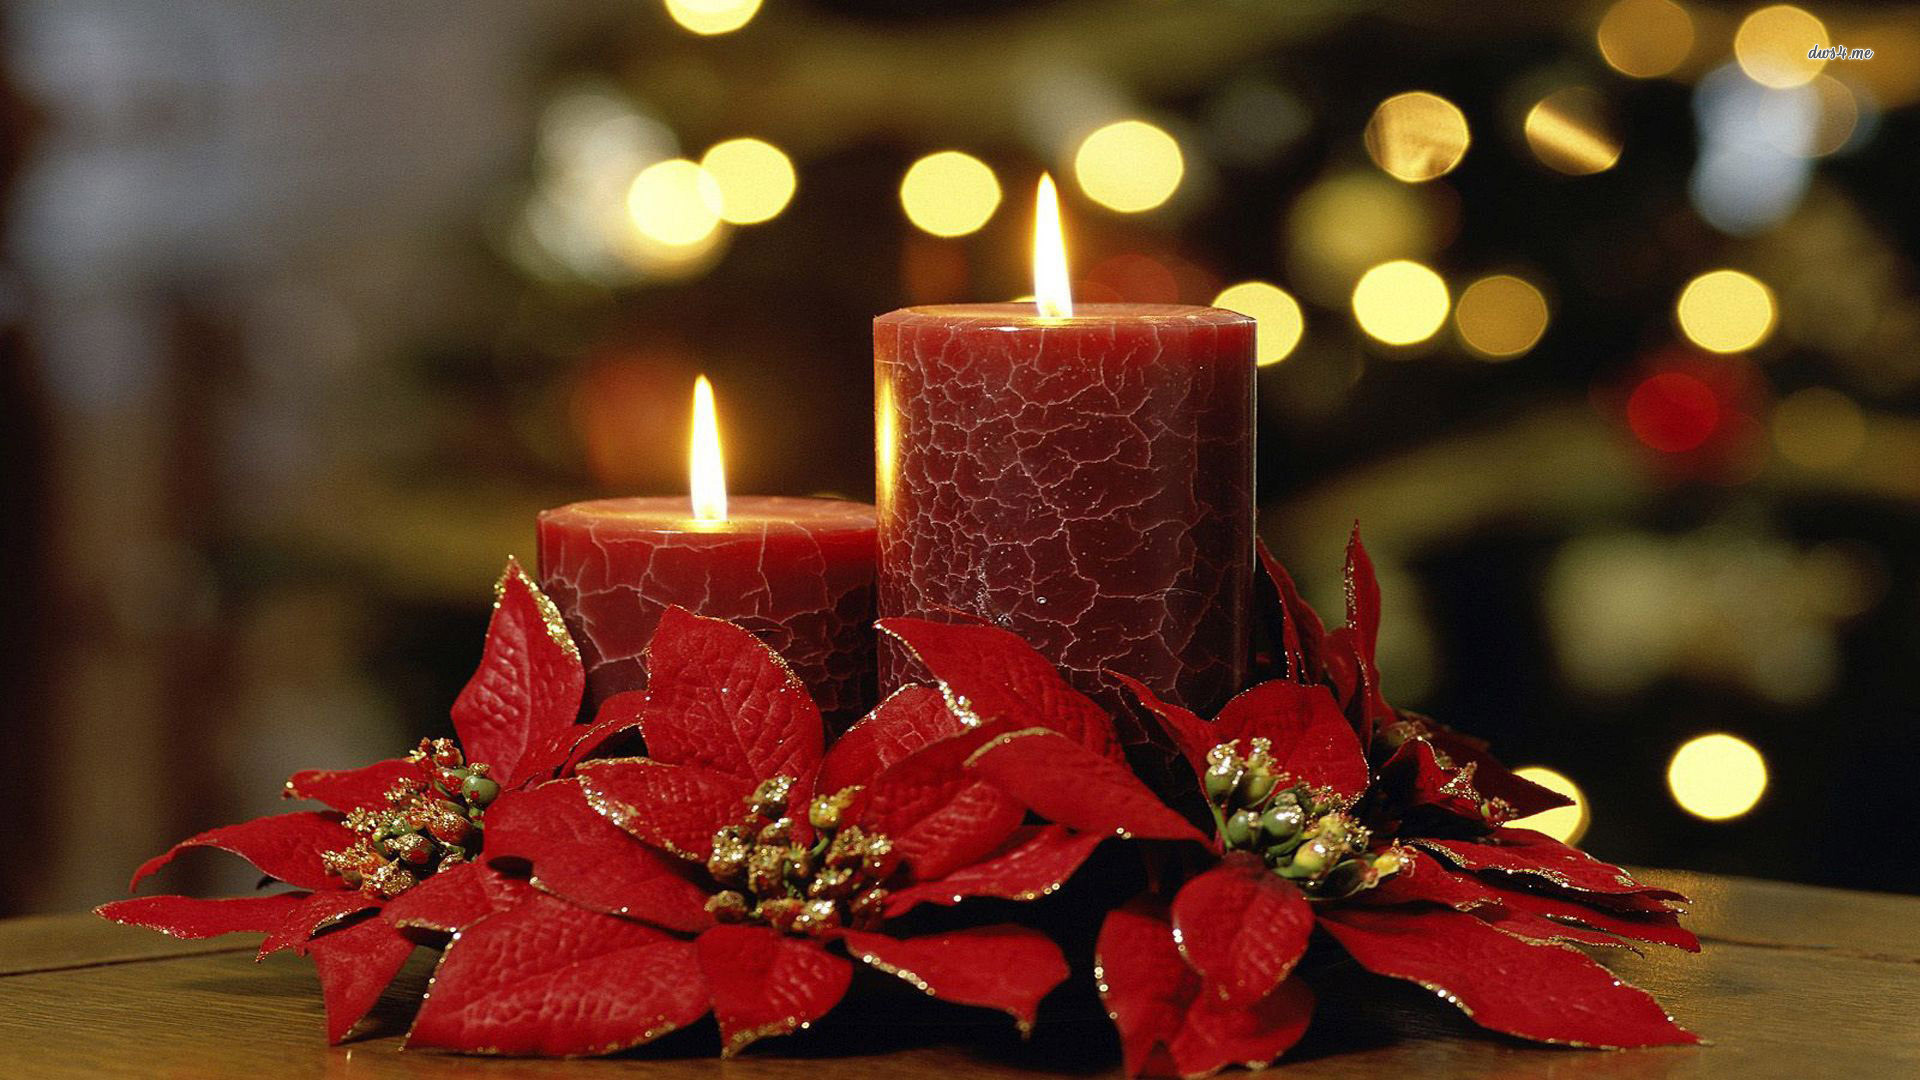 Candle Photos Download The BEST Free Candle Stock Photos  HD Images